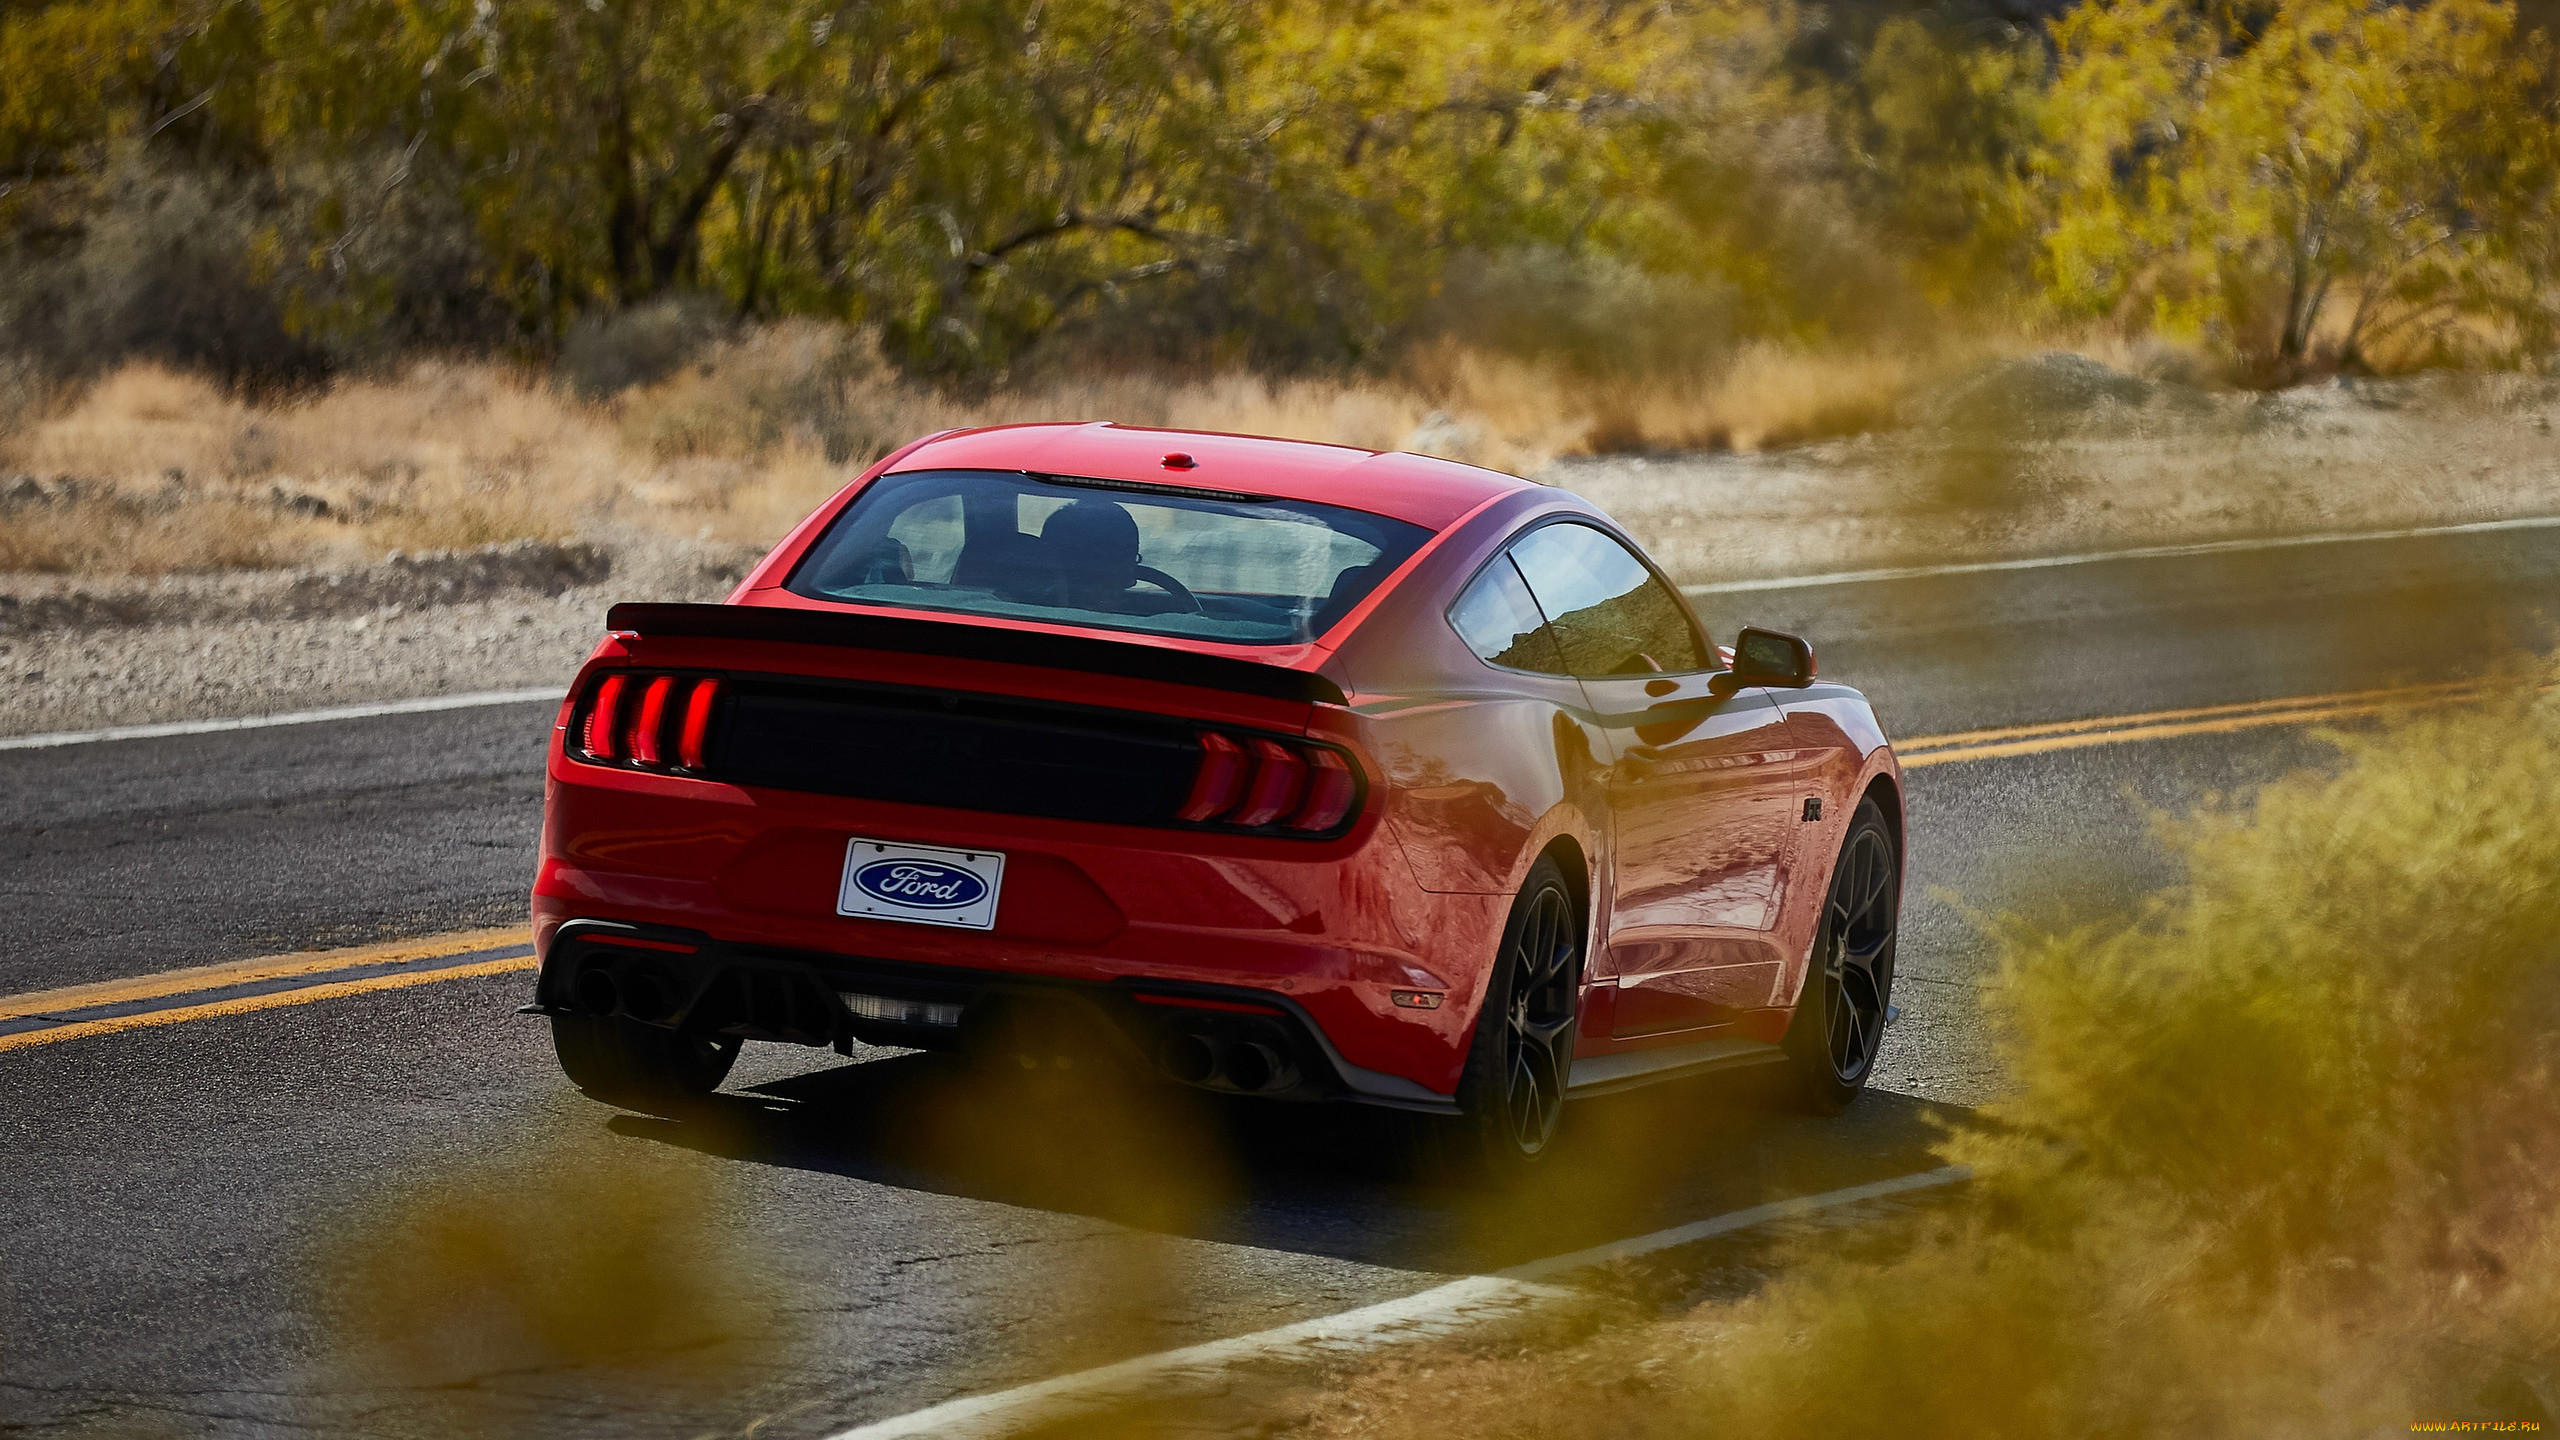 2019 ford mustang series 1 rtr, , mustang, coupe, rtr, series, 1, ford, 2019, 